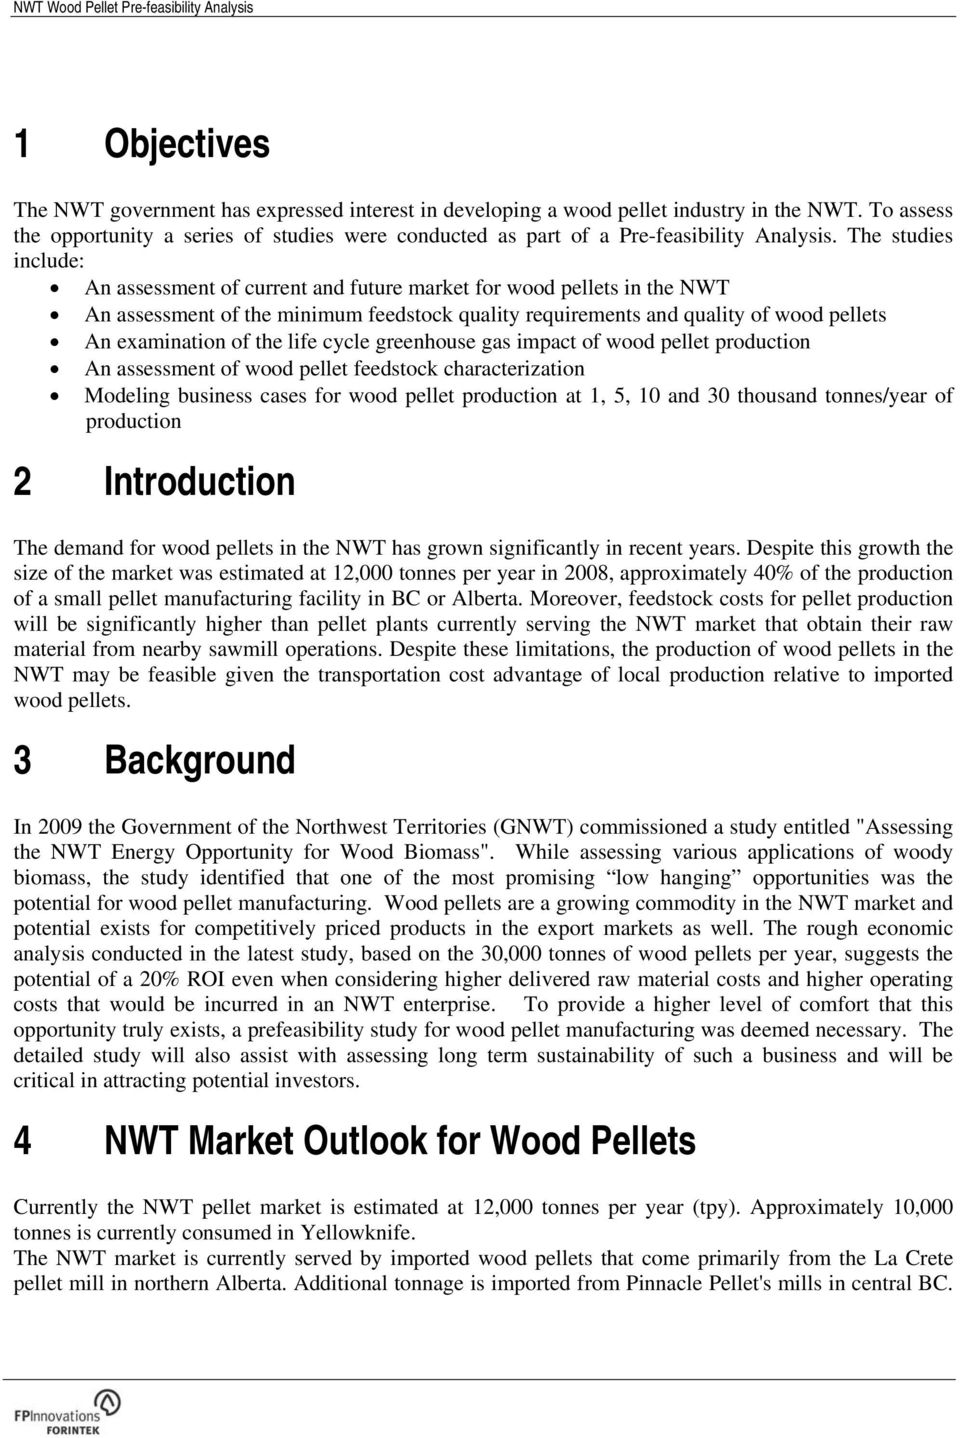 The studies include: An assessment of current and future market for wood pellets in the NWT An assessment of the minimum feedstock quality requirements and quality of wood pellets An examination of